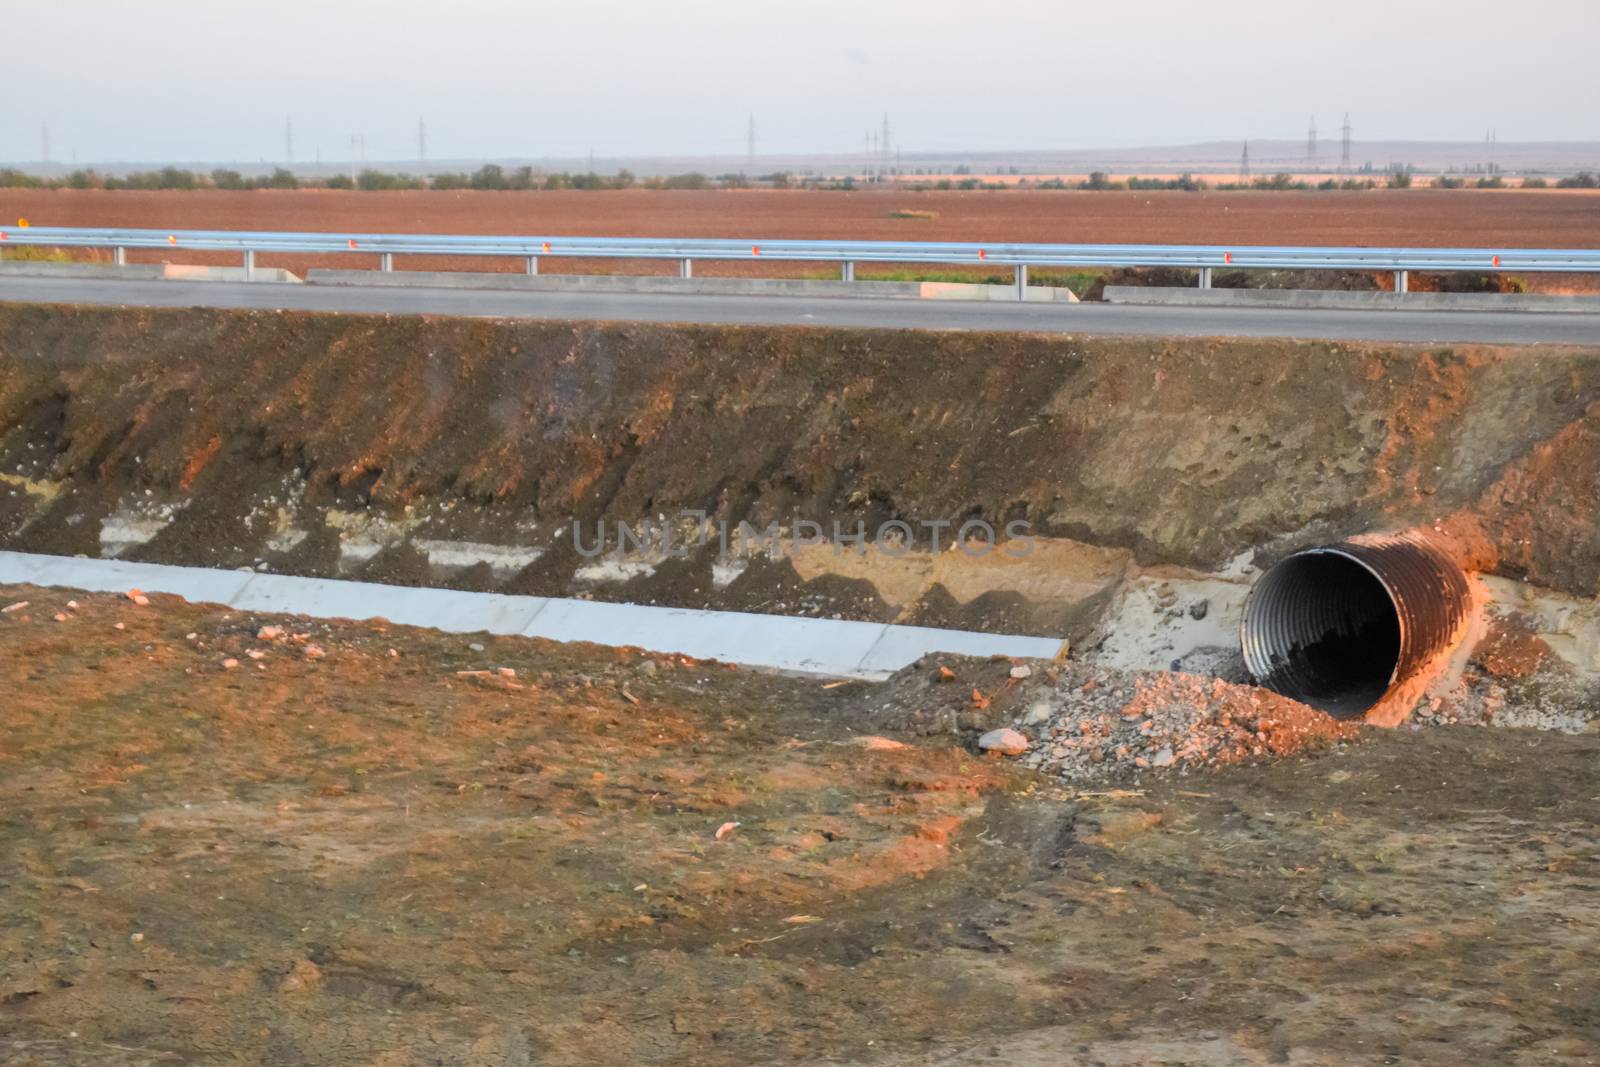 Construction of stormwater and sewerage at roads and highways. a Transportation sewer.